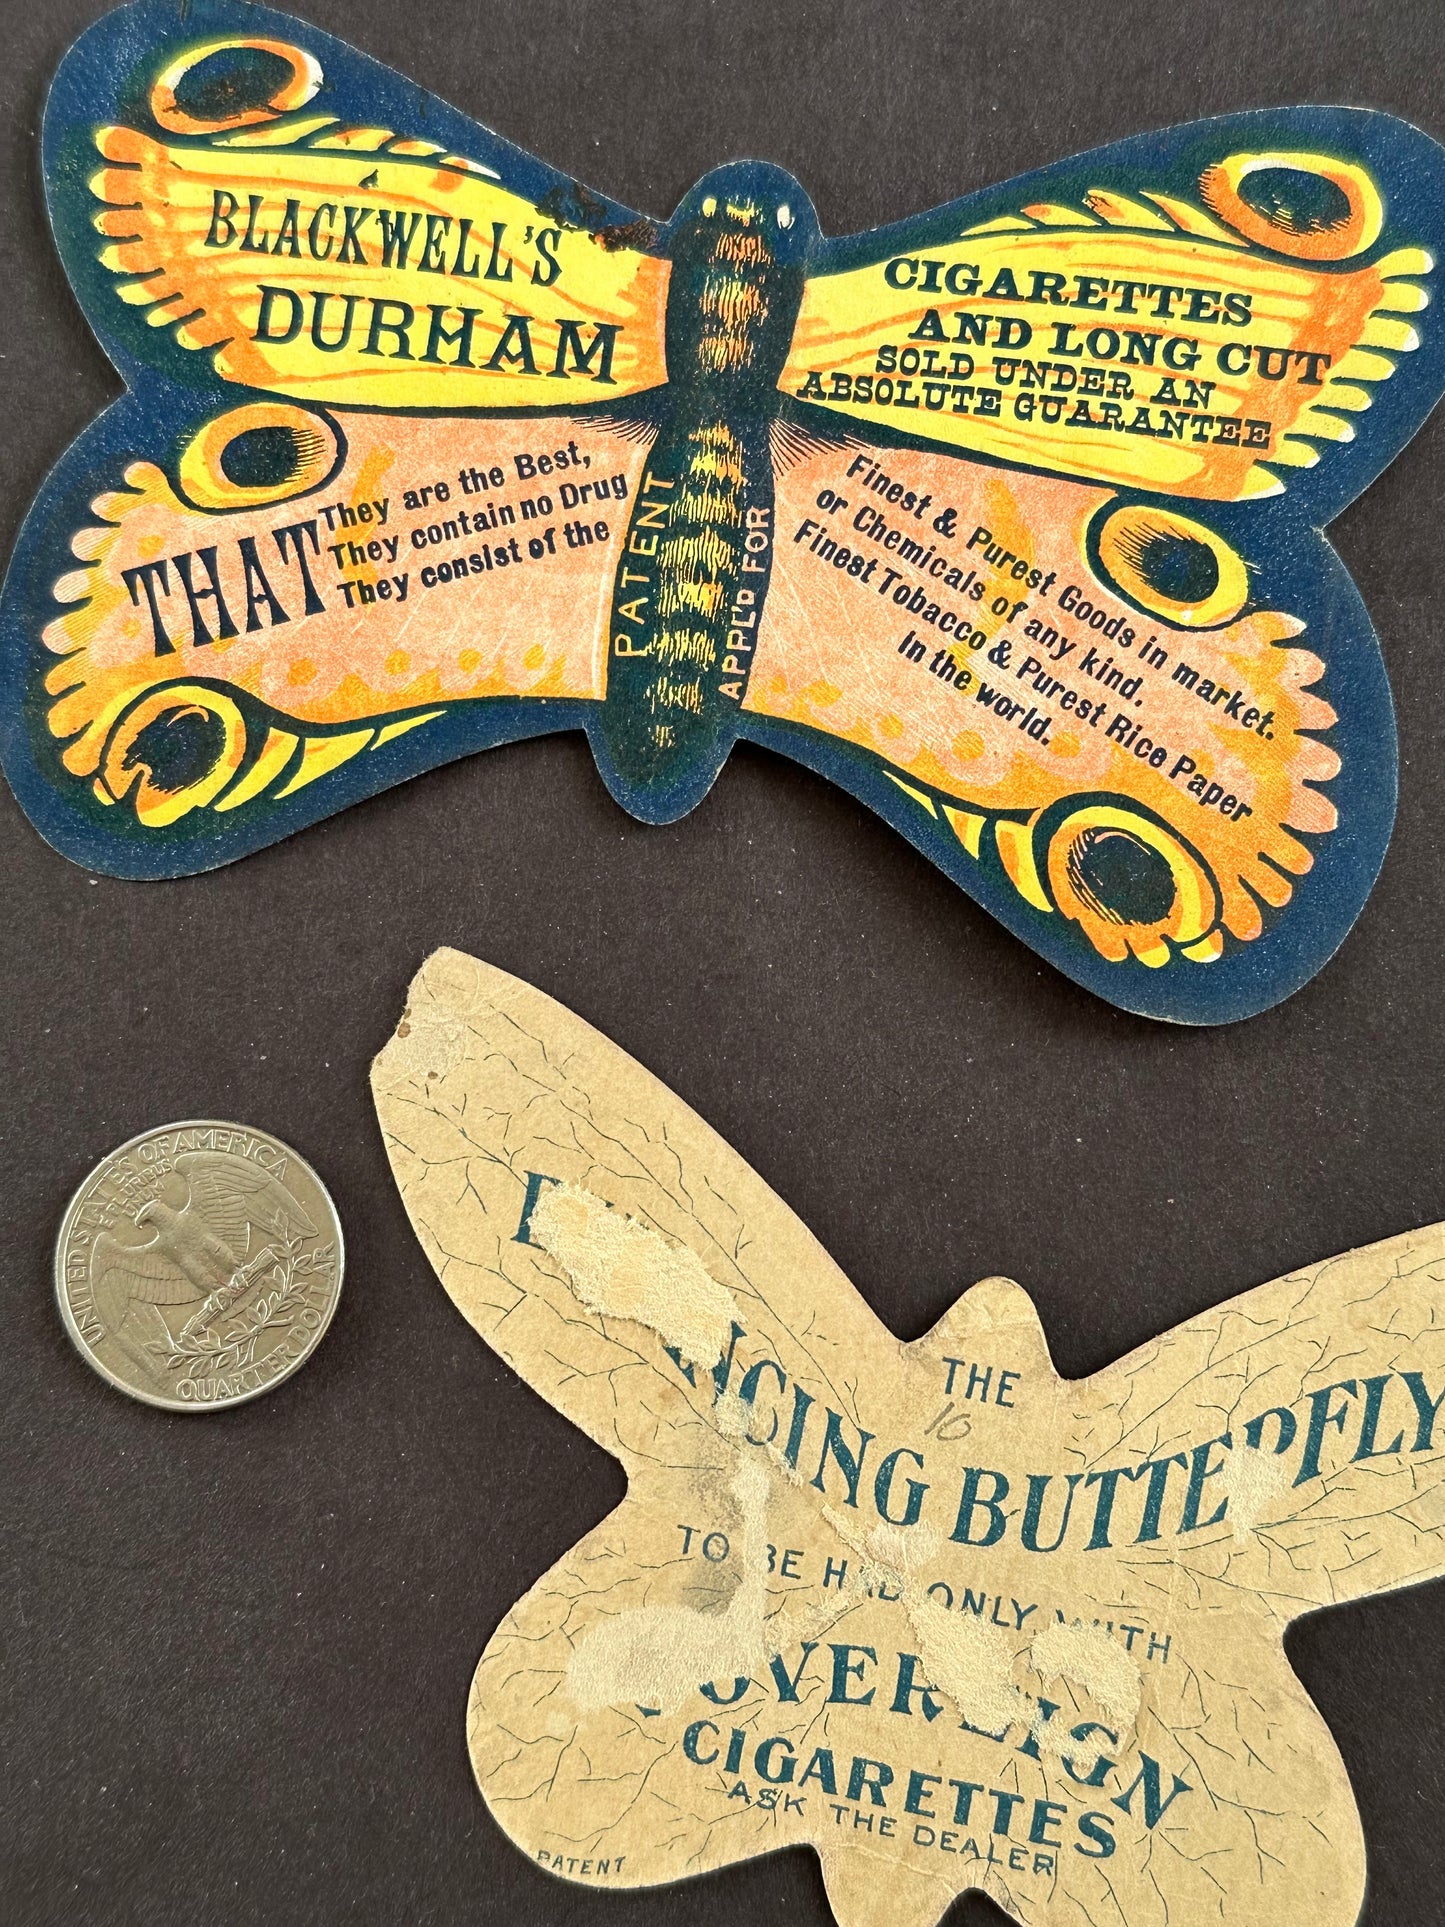 Two Butterfly-Shaped Tobacco Trade Cards (19th century)